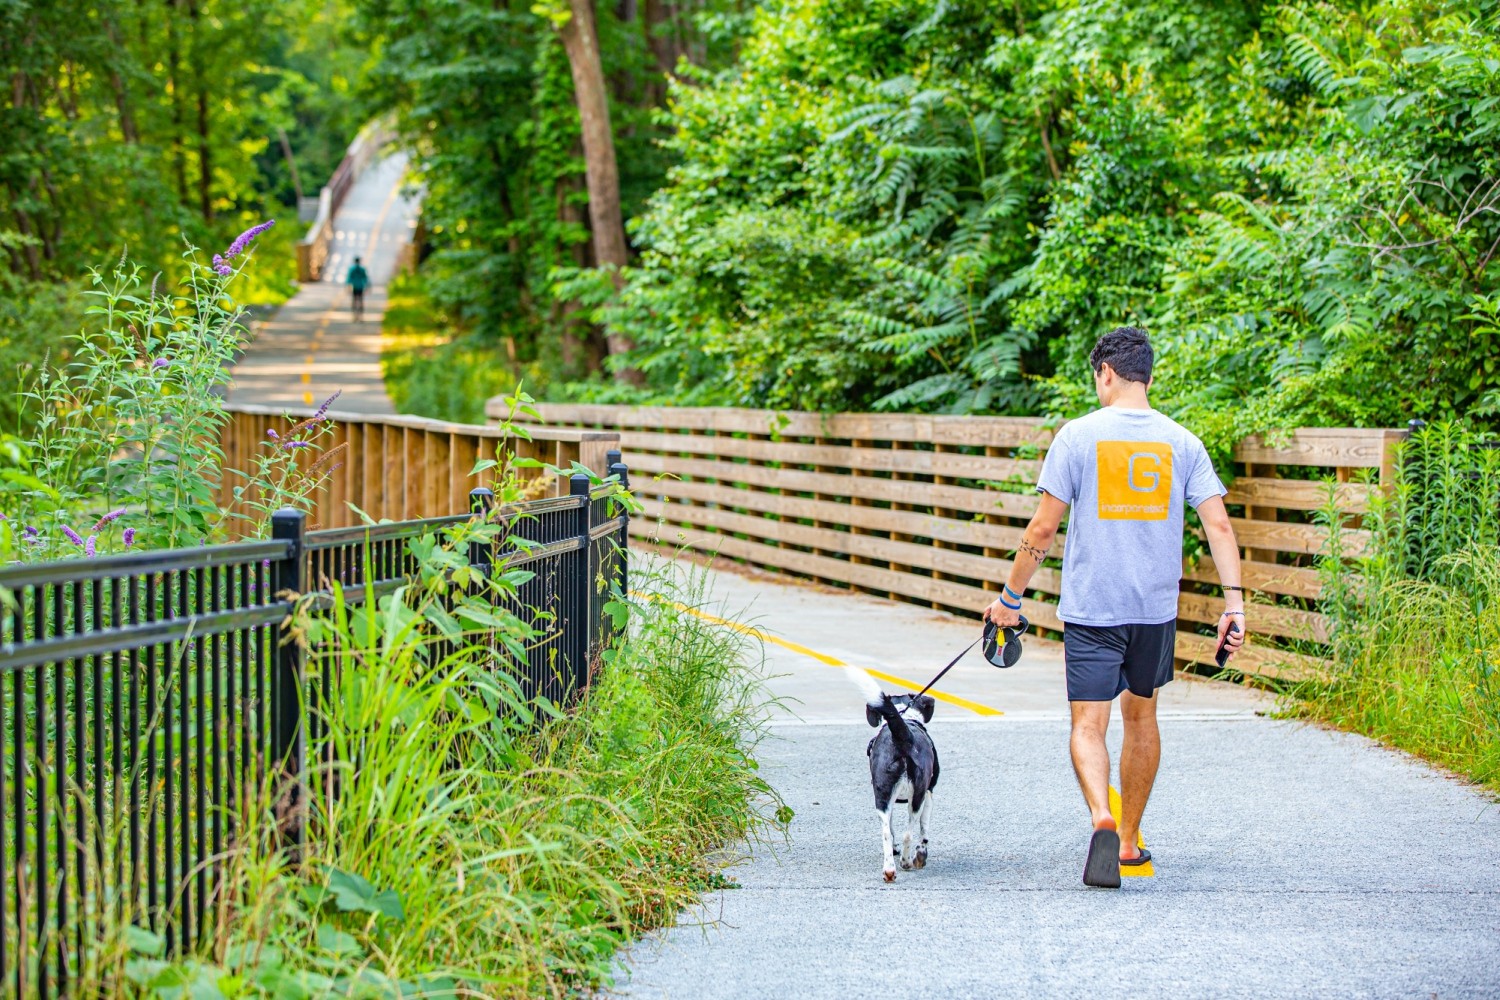 The trails are excellent connections for residents and visitors to explore and interact with Cumberland’s attractions and rich natural assets.